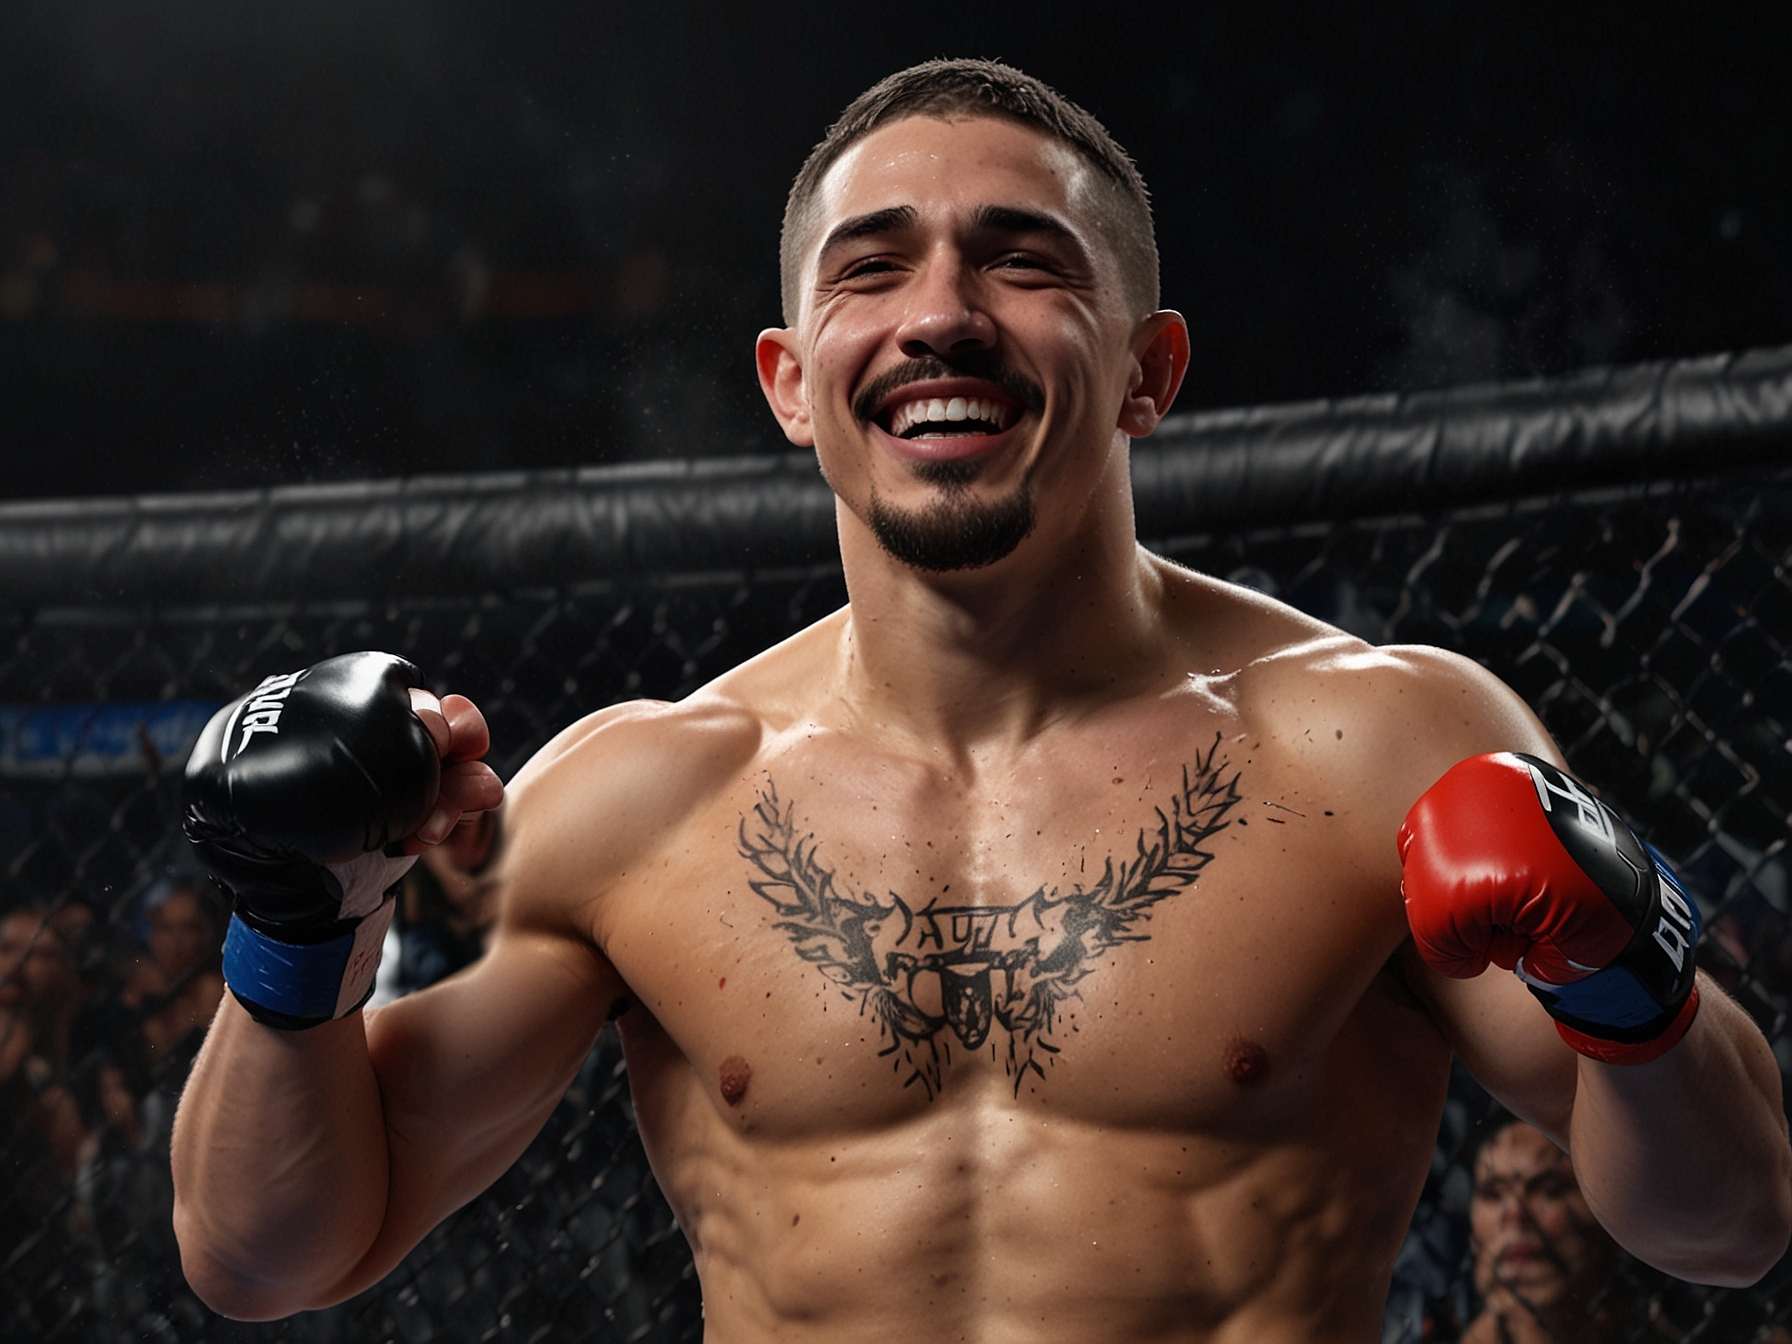 Robert Whittaker celebrates after delivering a stunning knockout victory over Ikram Aliskerov at the historic UFC debut event in Saudi Arabia, showcasing his remarkable skills and experience.